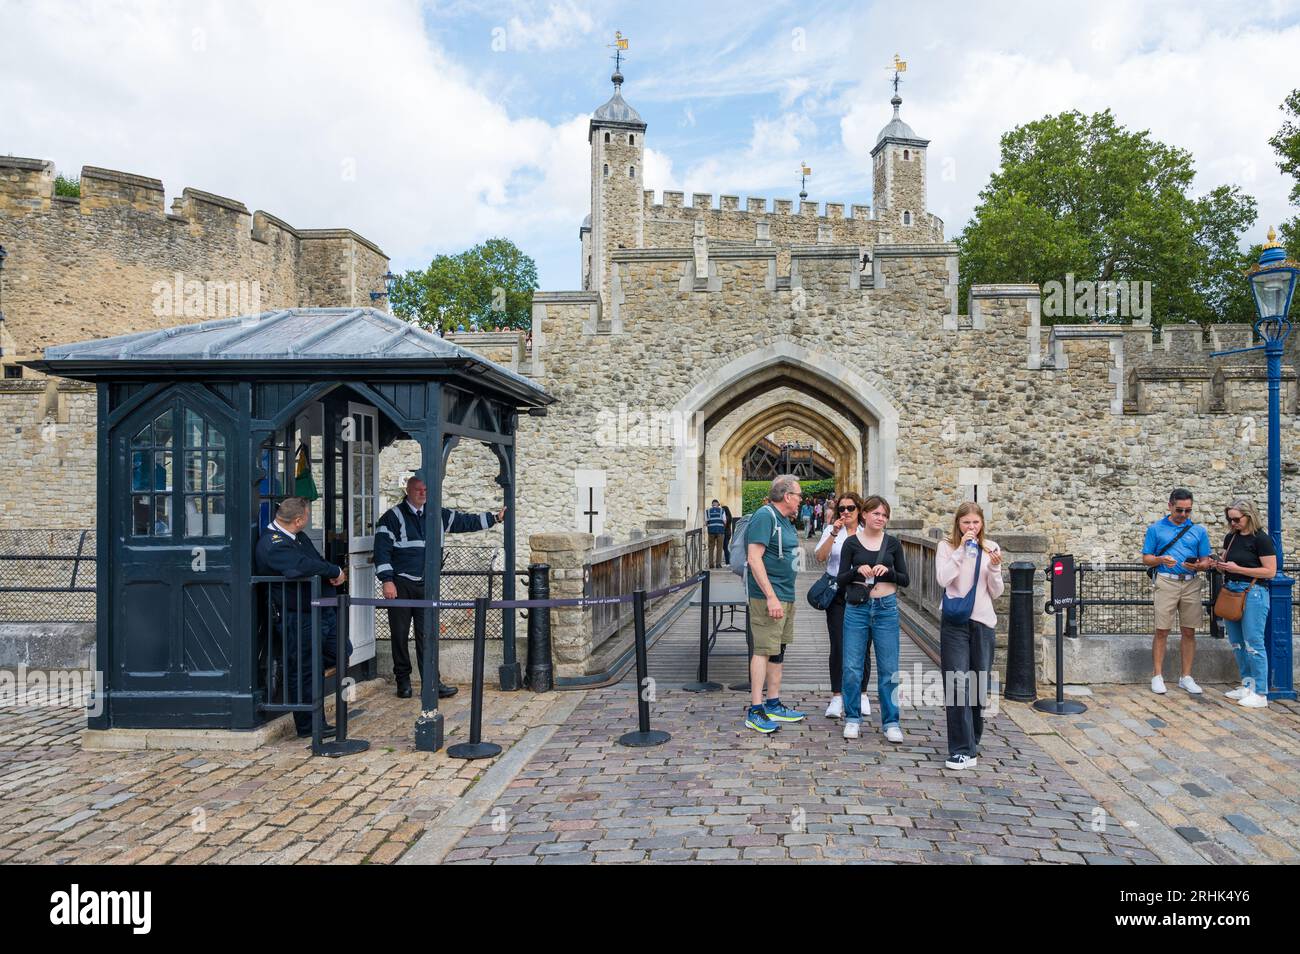 People exit the Tower of London. Security cabin and guard control at exit onto Tower Wharf. London, England, UK Stock Photo